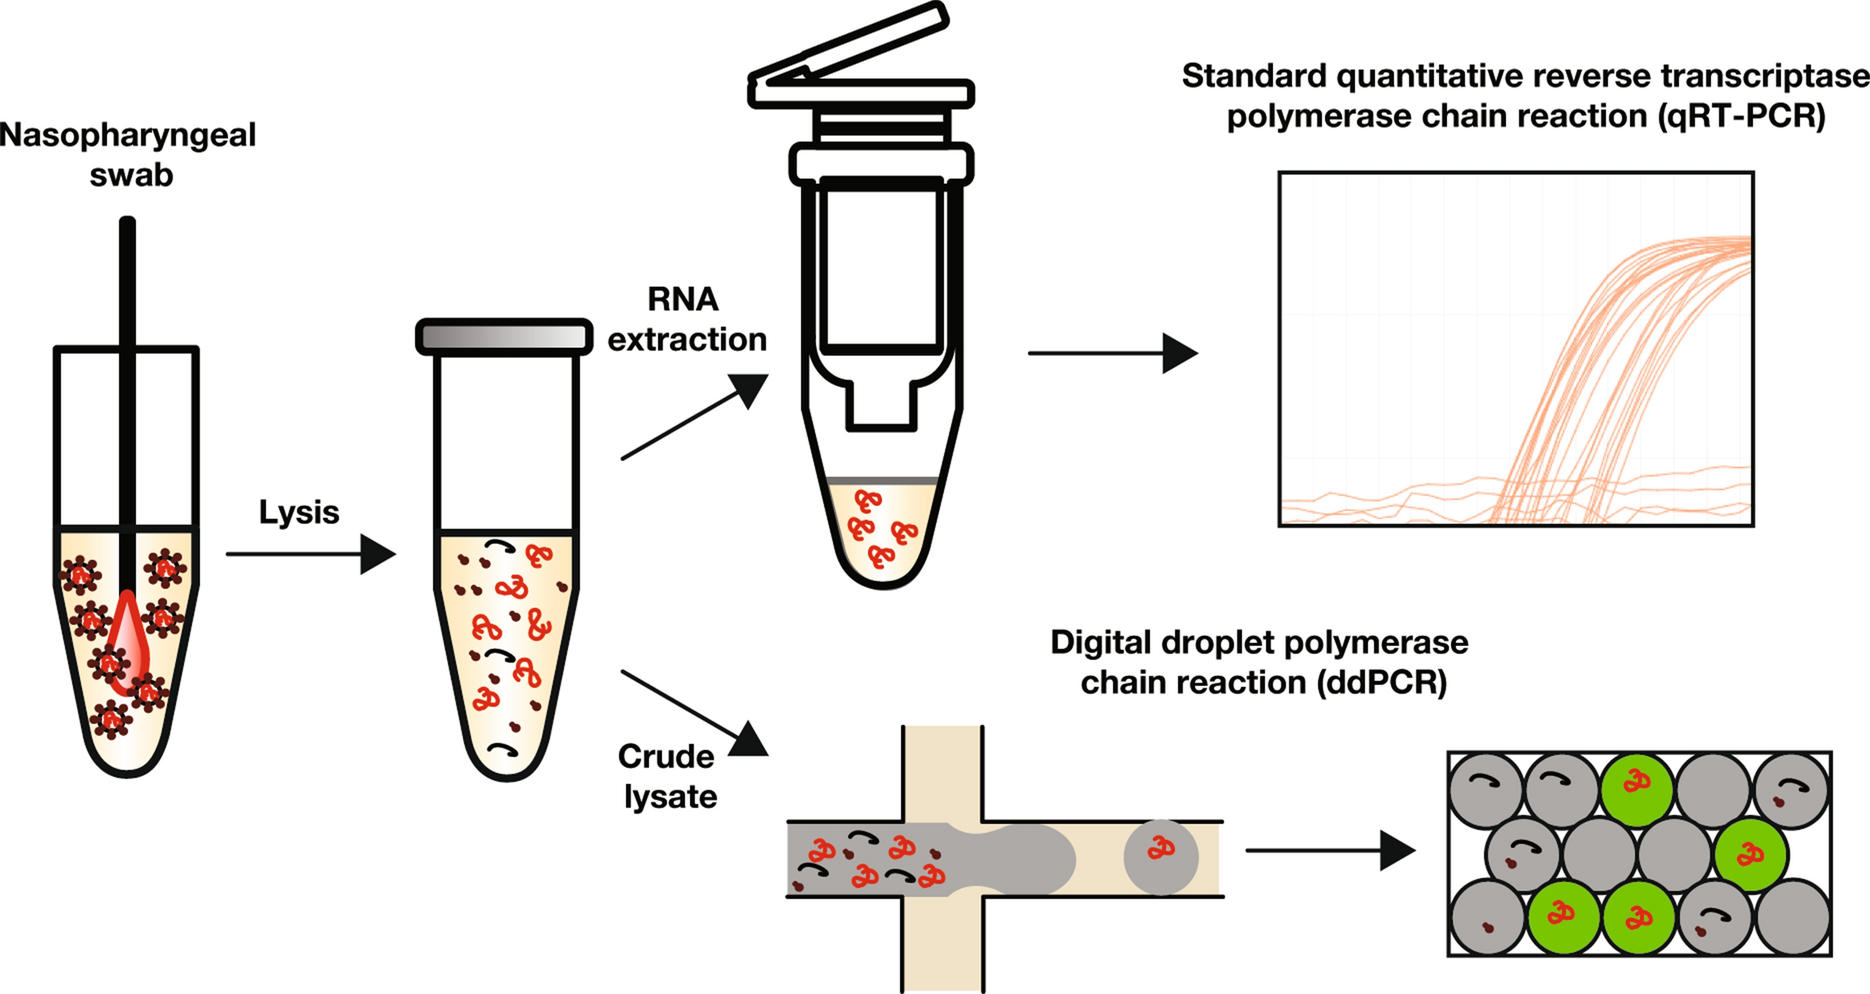 Establishing a mass spectrometry-based system for rapid detection of  SARS-CoV-2 in large clinical sample cohorts - Nature Communications